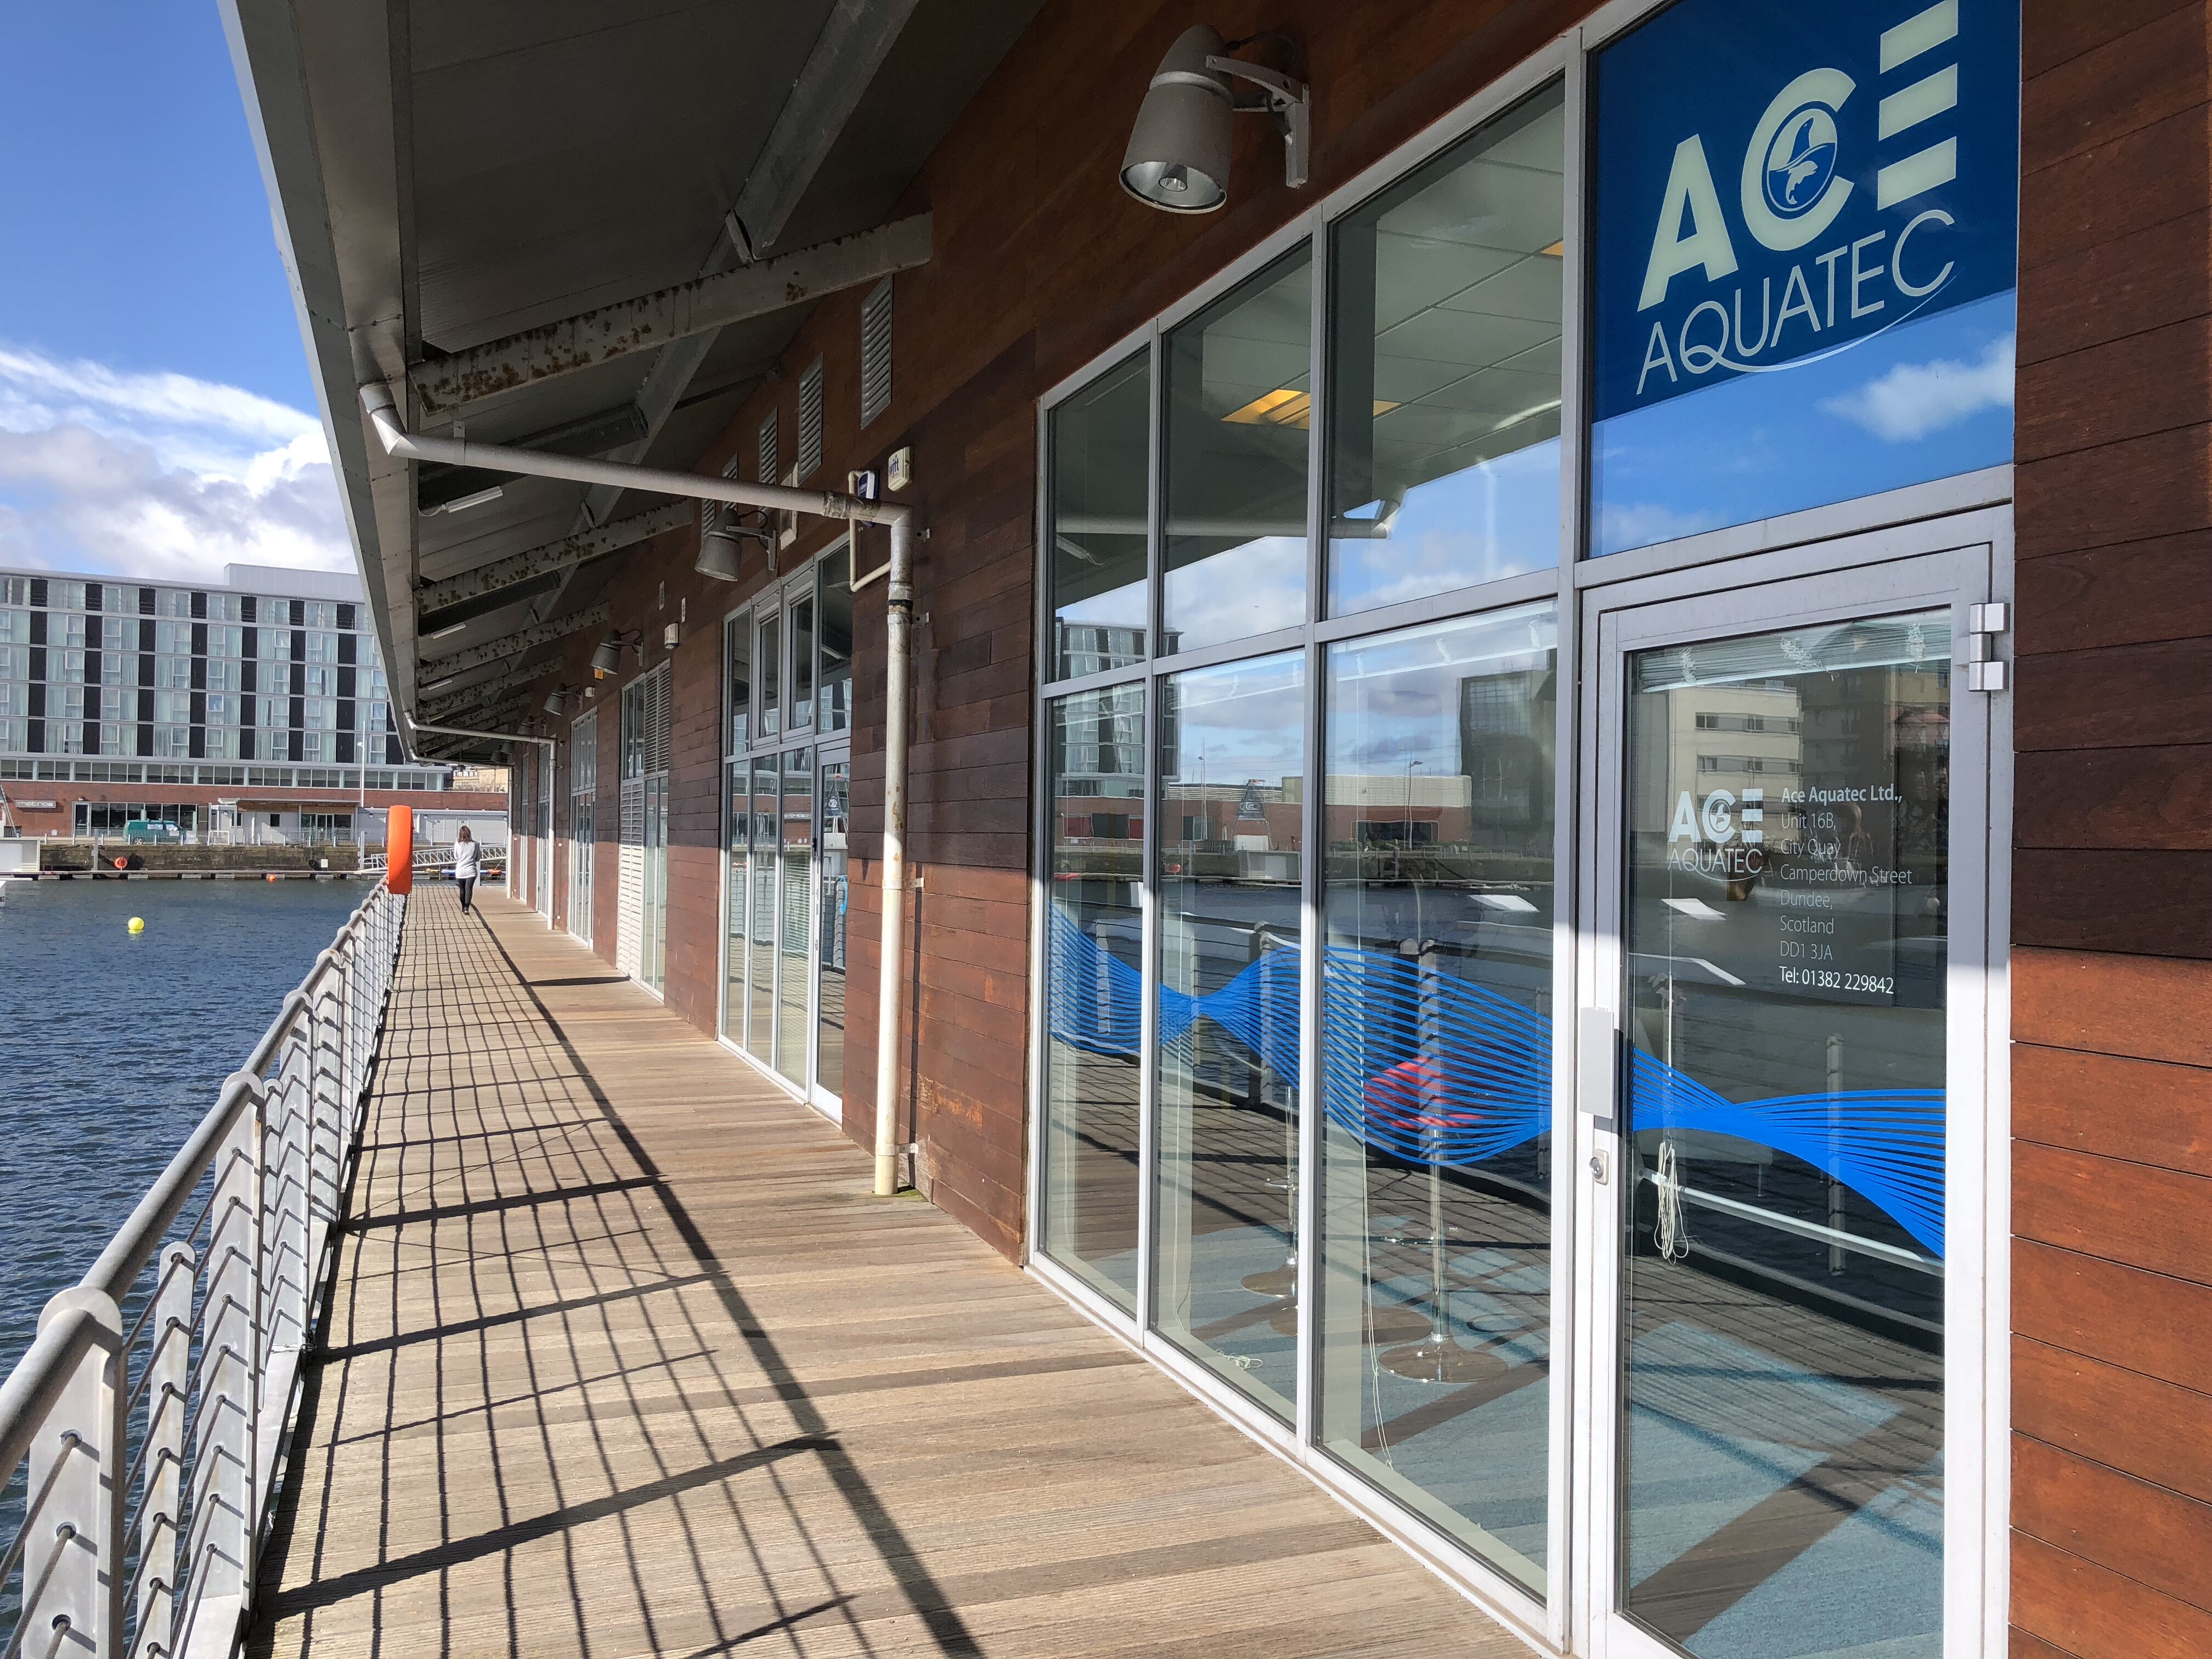 Ace Aquatec's Dundee office